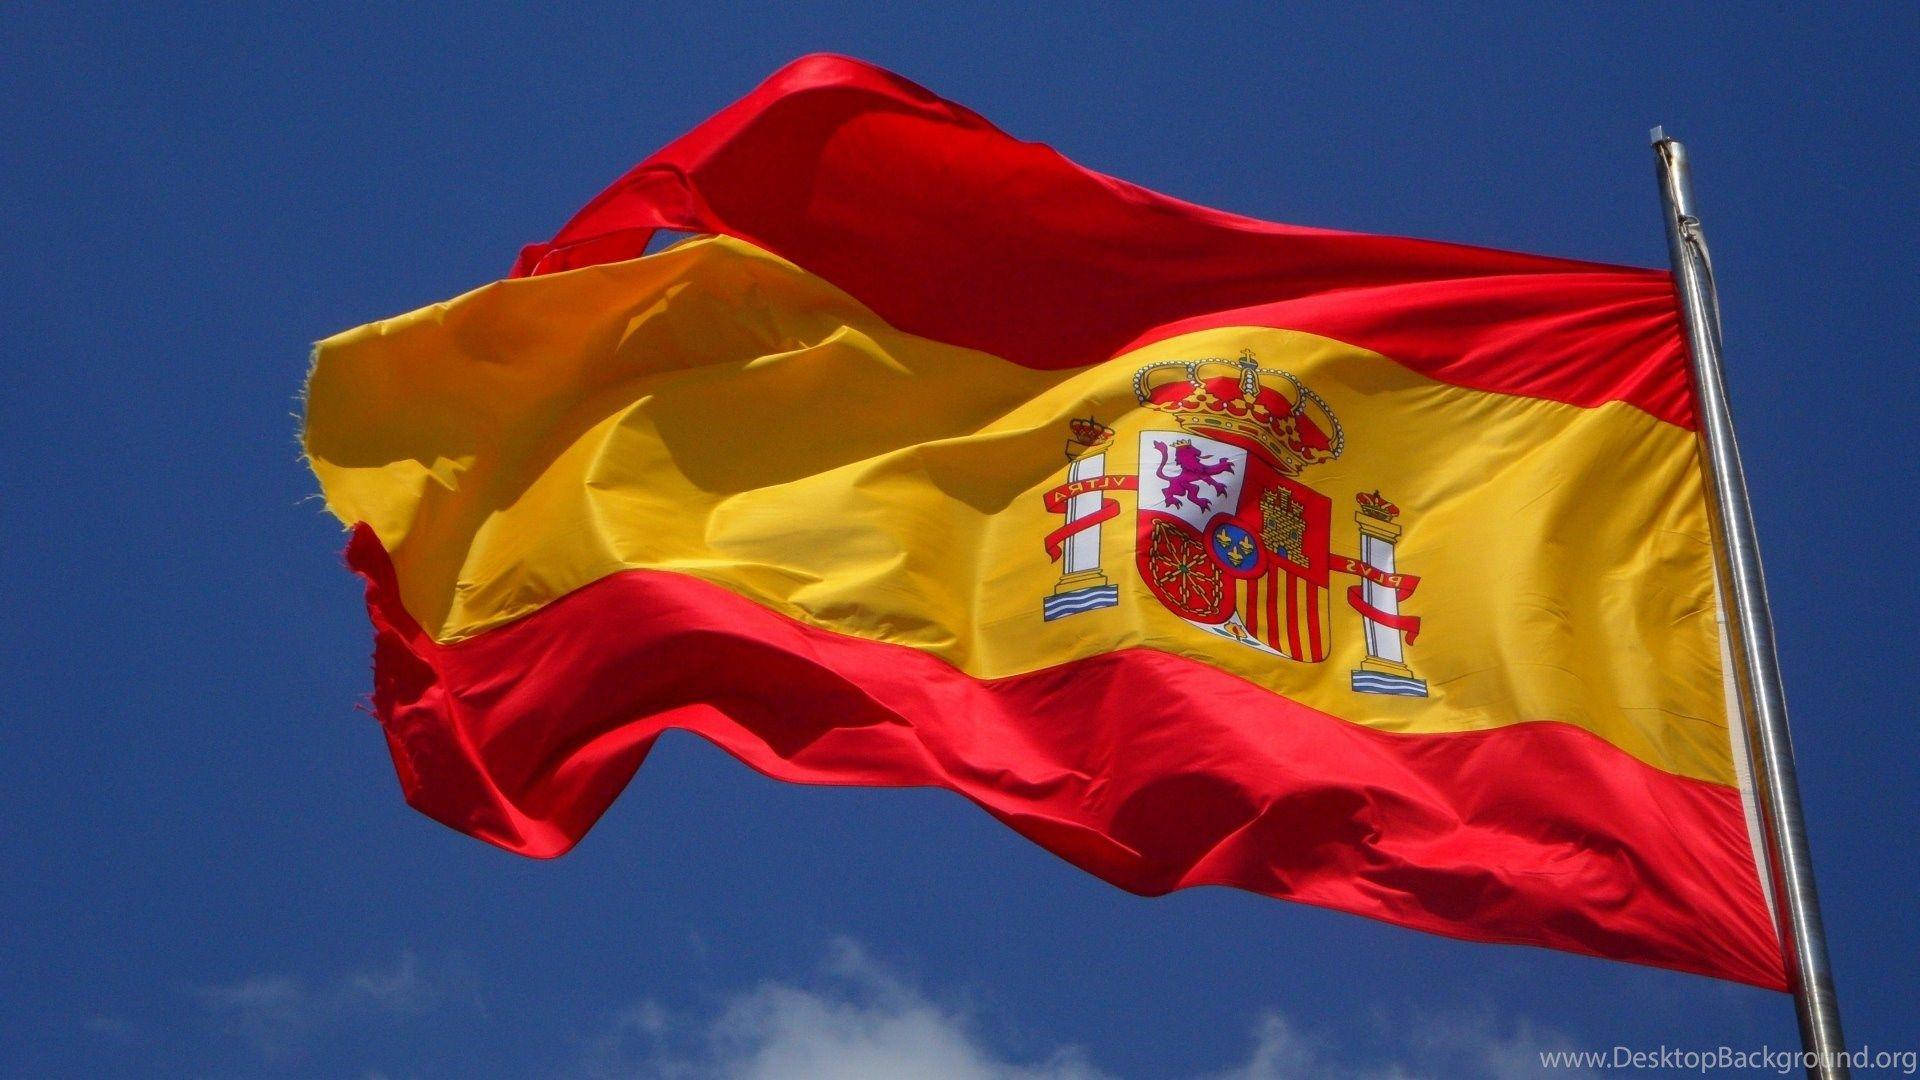 Spain 1920X1080 Wallpaper and Background Image